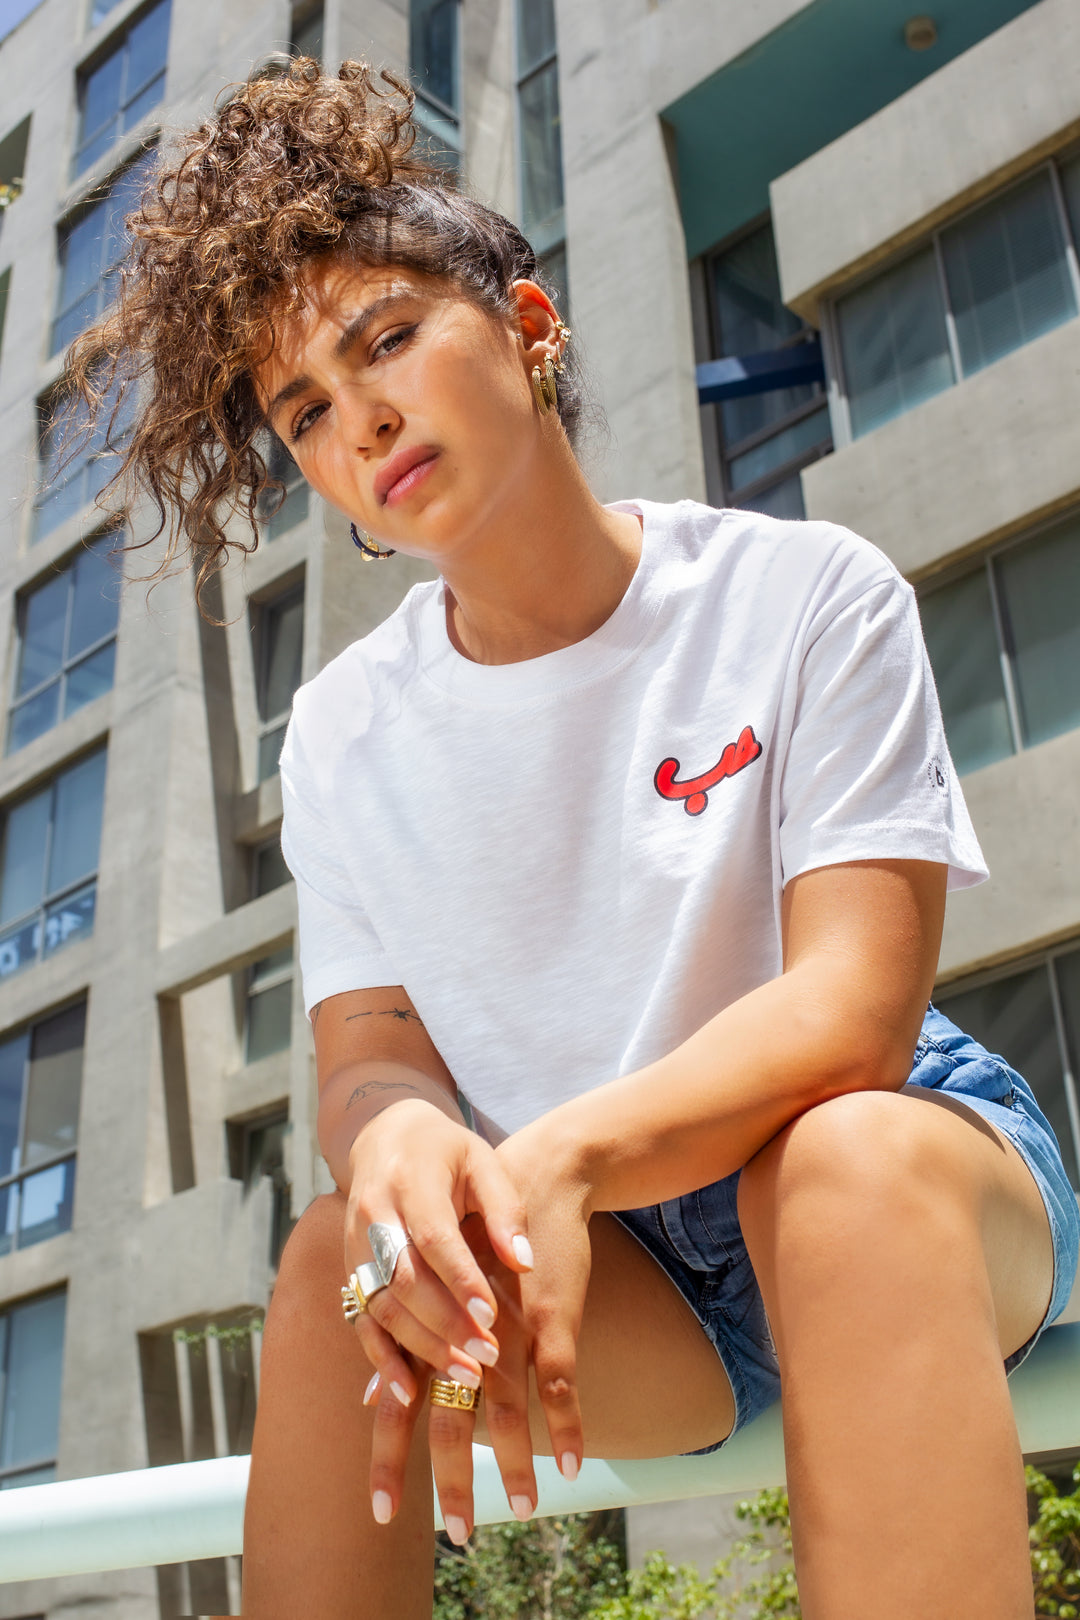 Young adult female wearing an Oversized white Crop Top with Hobb written in Arabic حب and printed in red silkscreen in the center of the shirt along with jeans shorts. Sitting in front of a modern building.